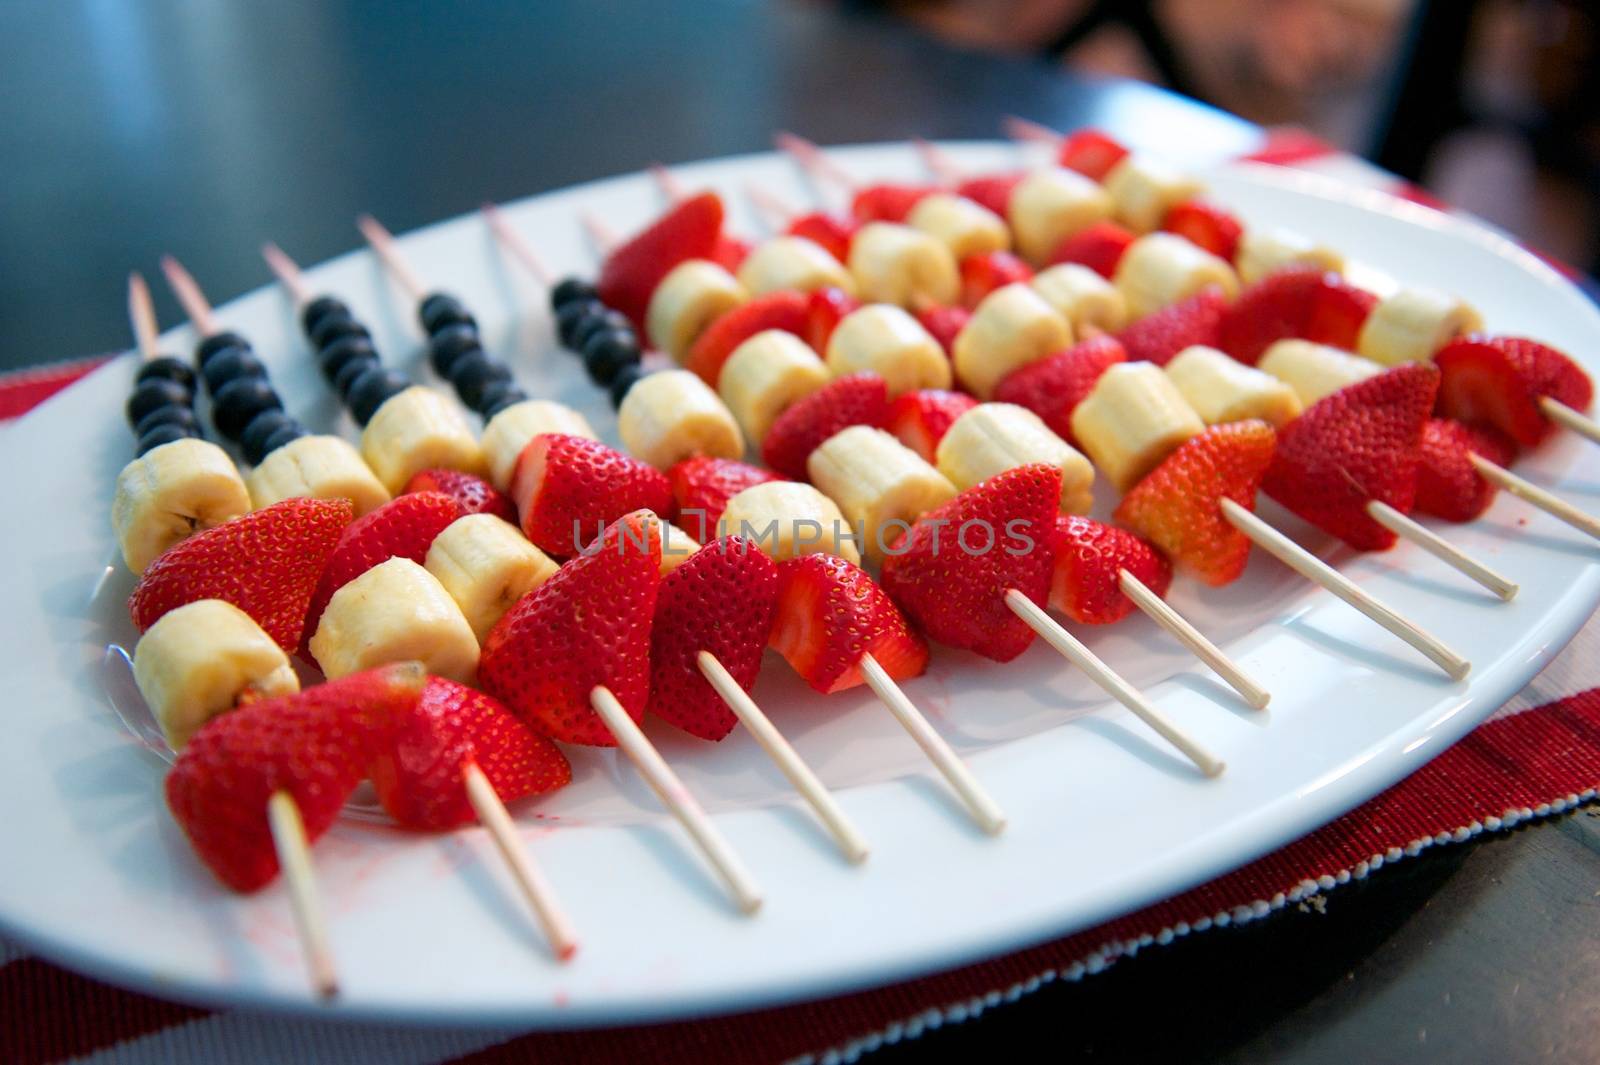 USA flag made entirely of fresh fruit and skewers on a white plate